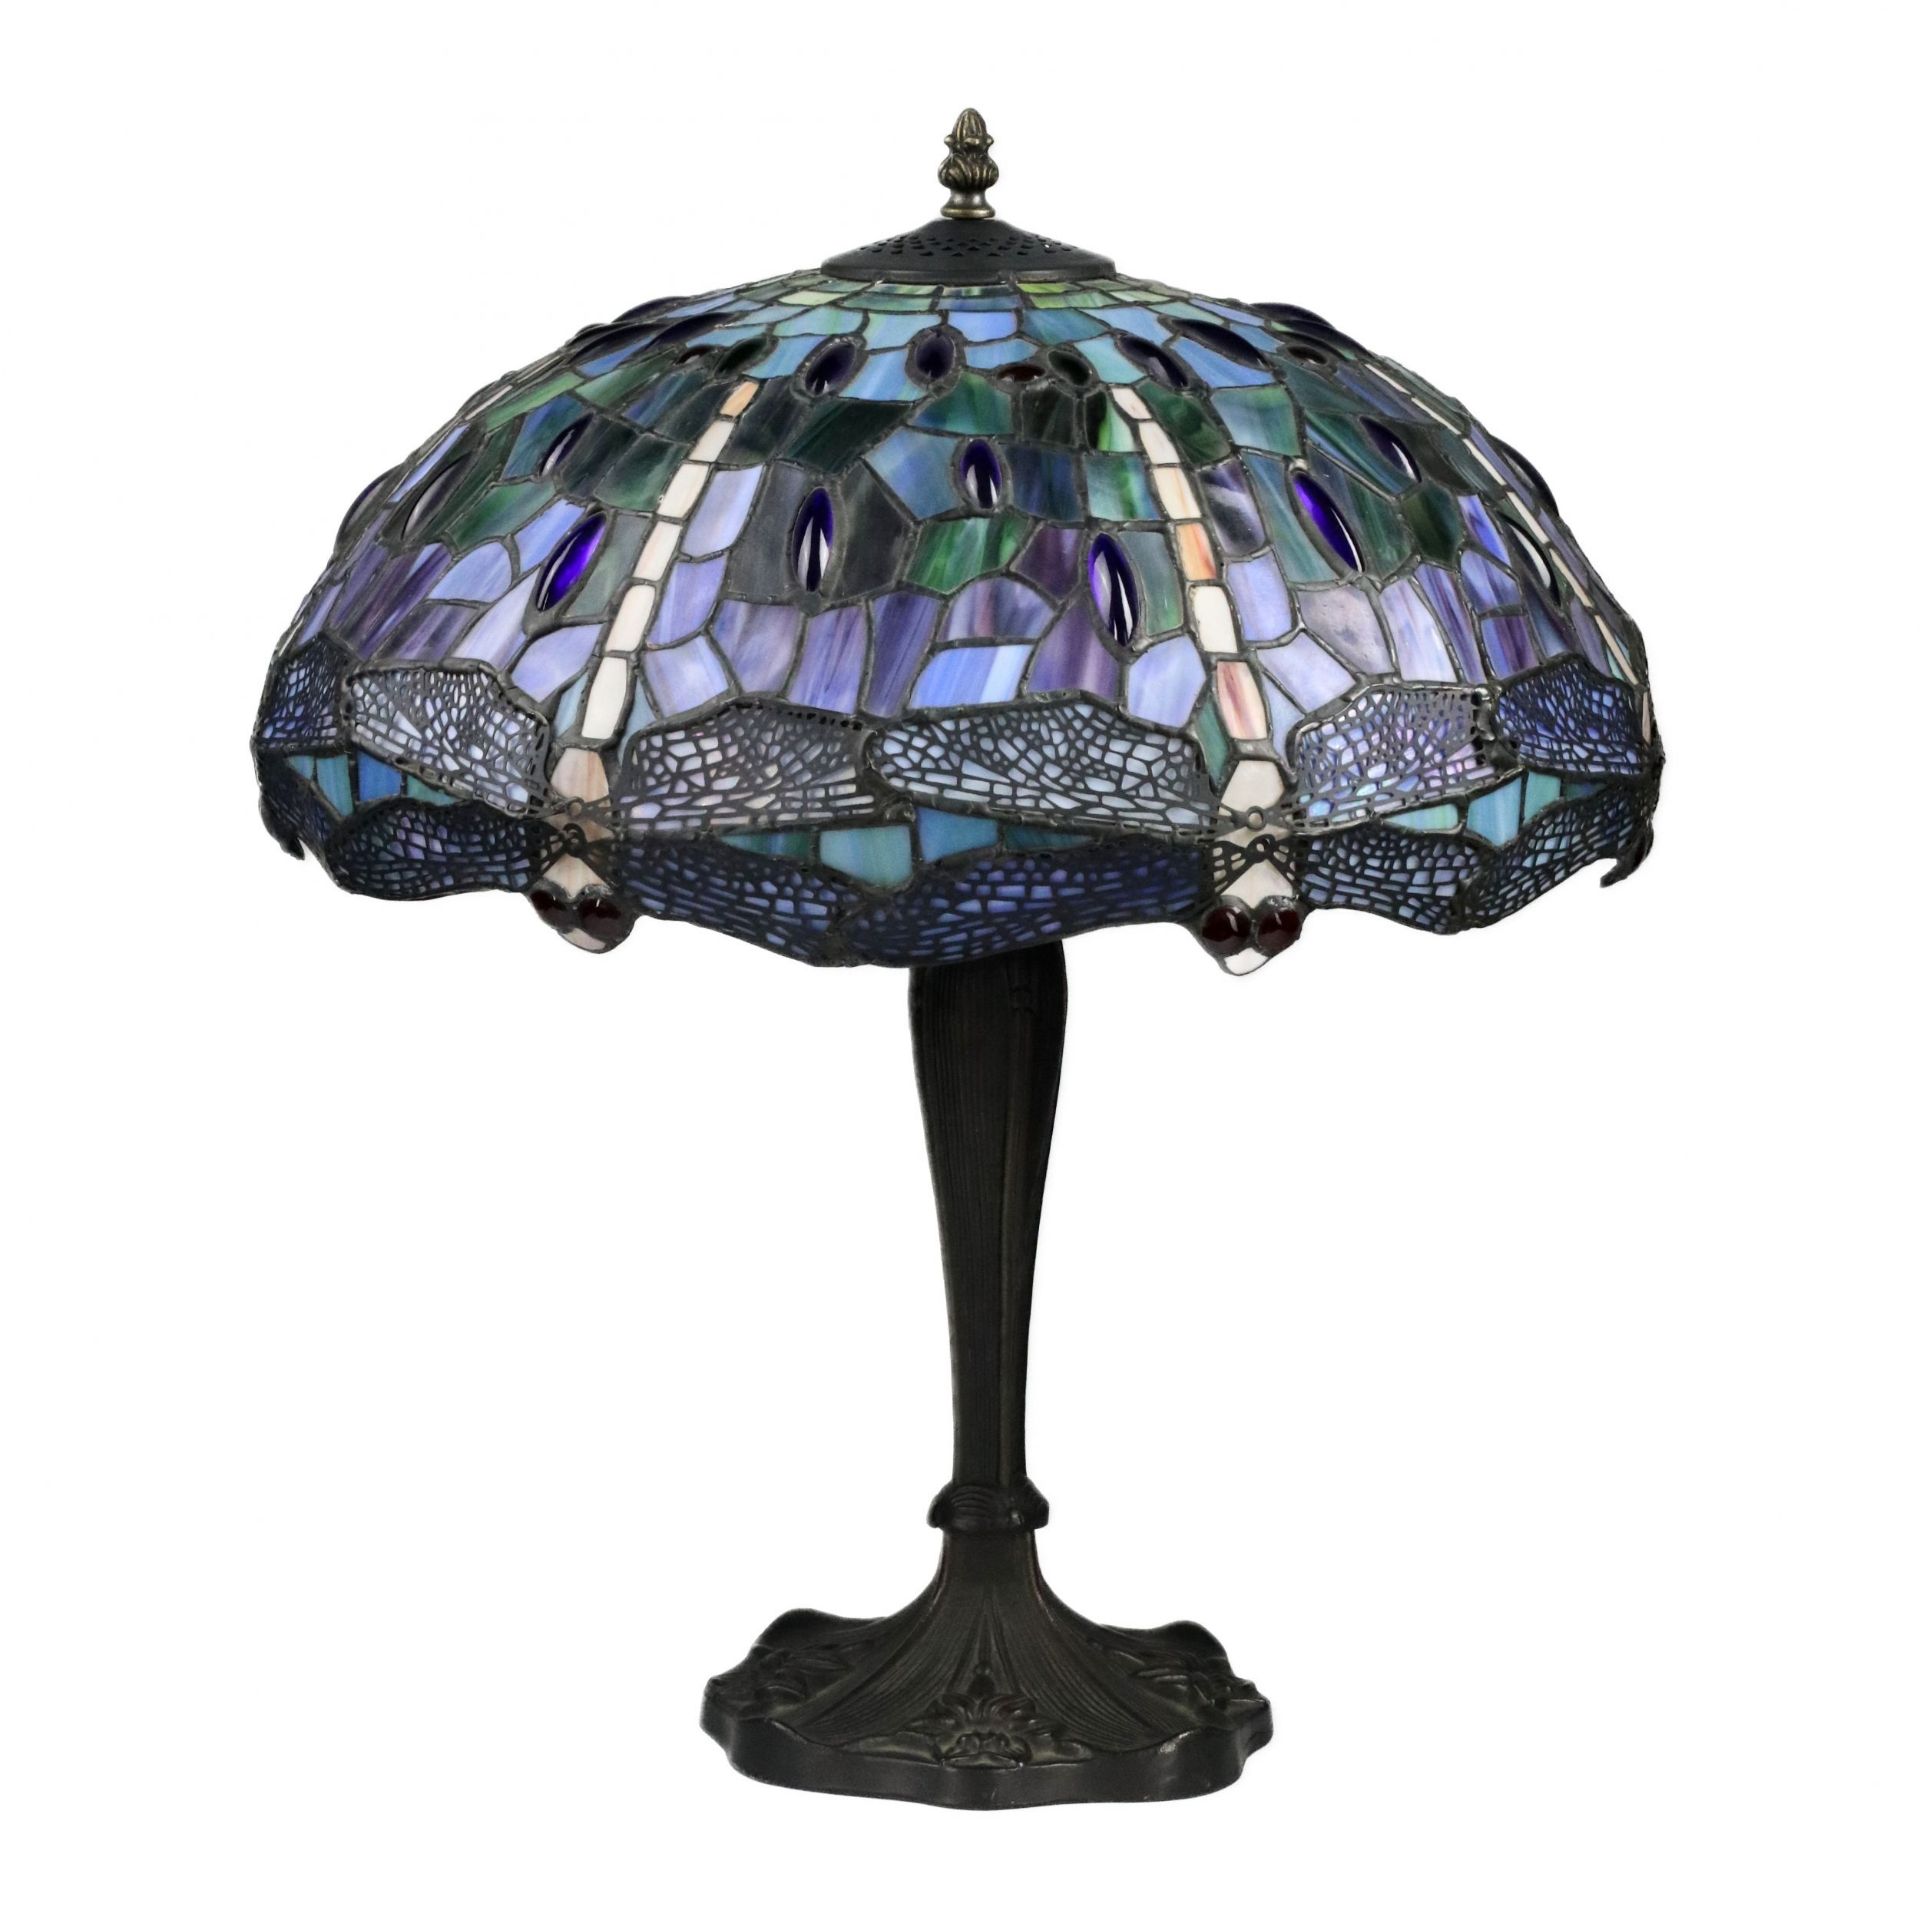 Stained glass lamp in Tiffany style. 20th century. - Image 2 of 5